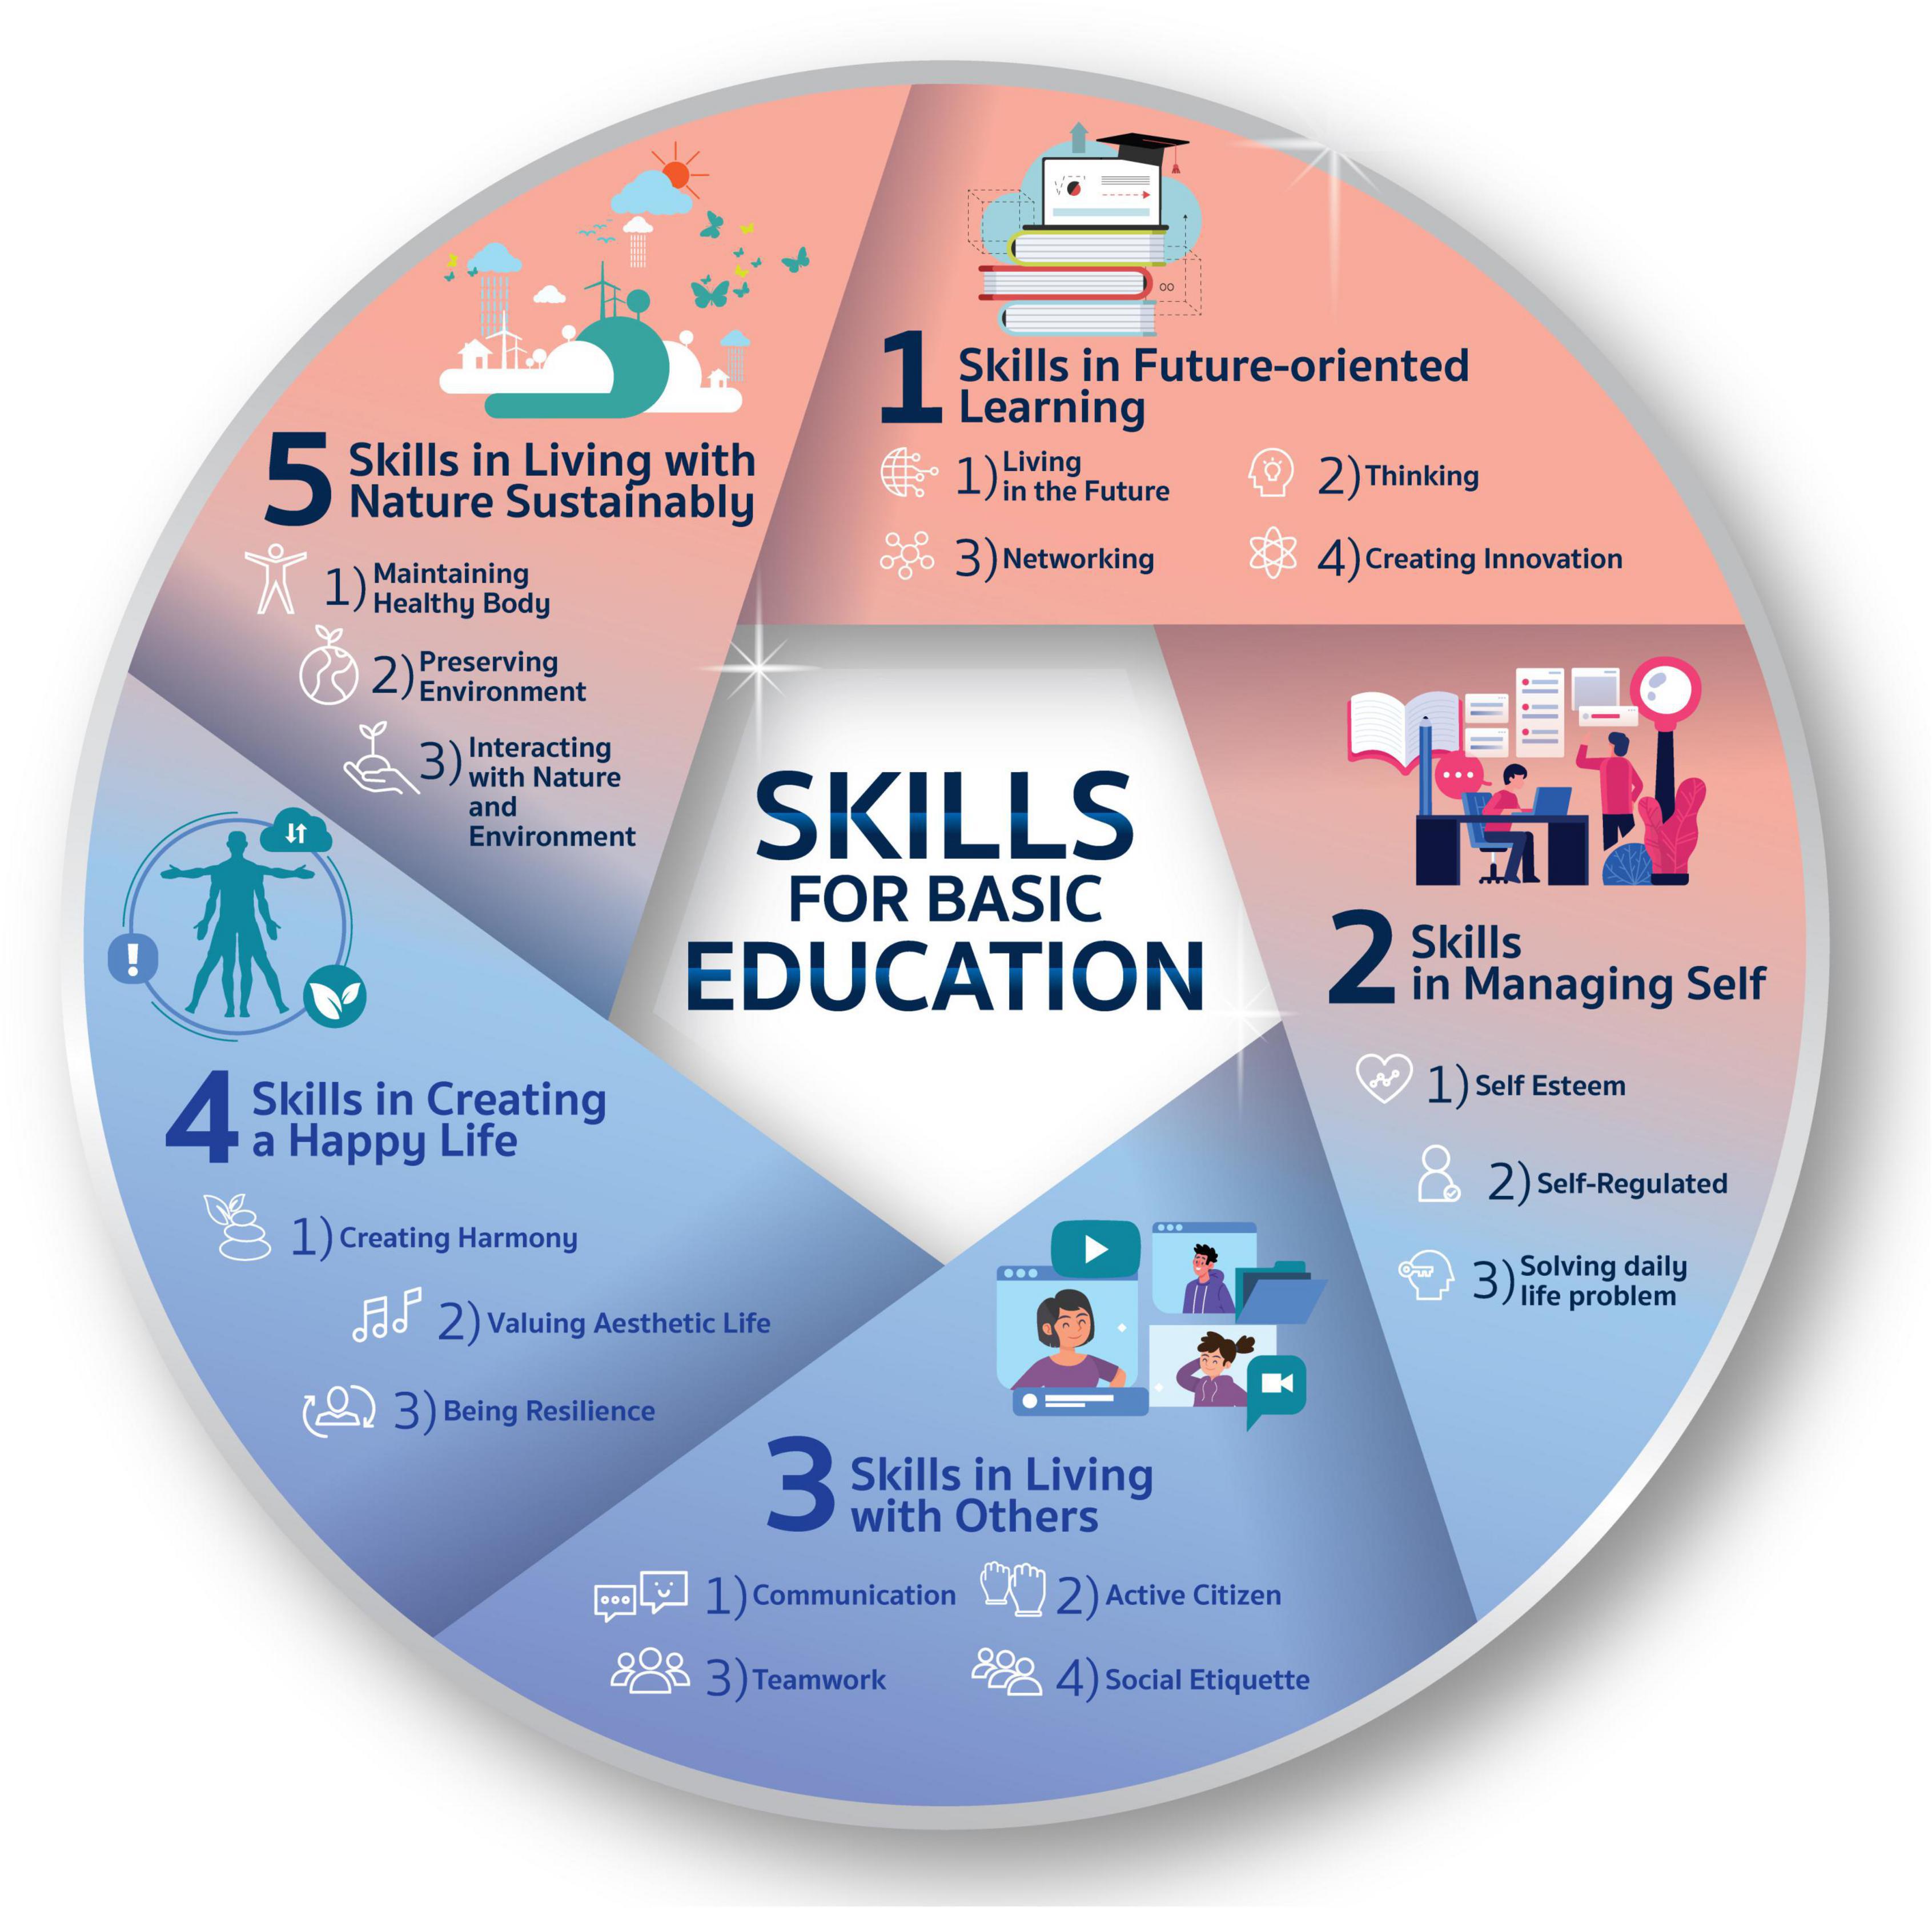 Frontiers  Re-envisioning a “skills framework” to meet 21st